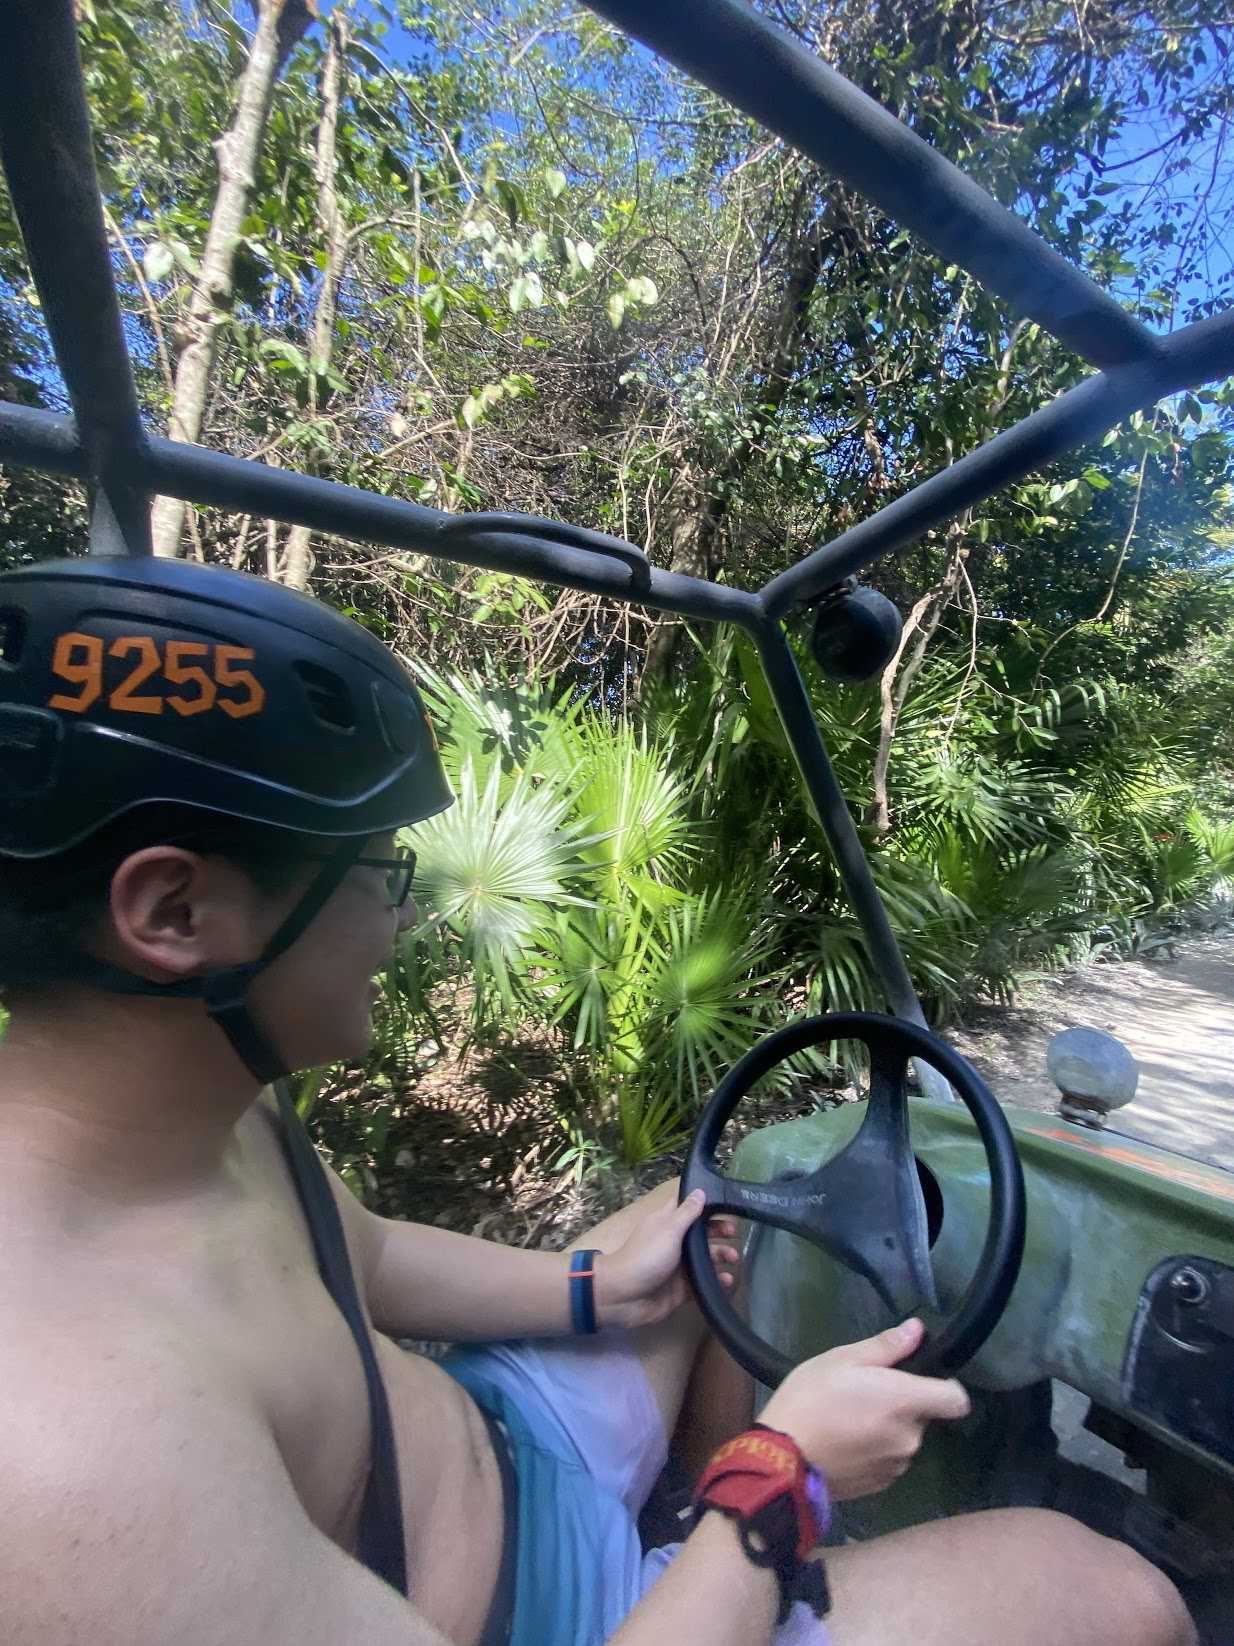 Driving the jeep topless in the forest!